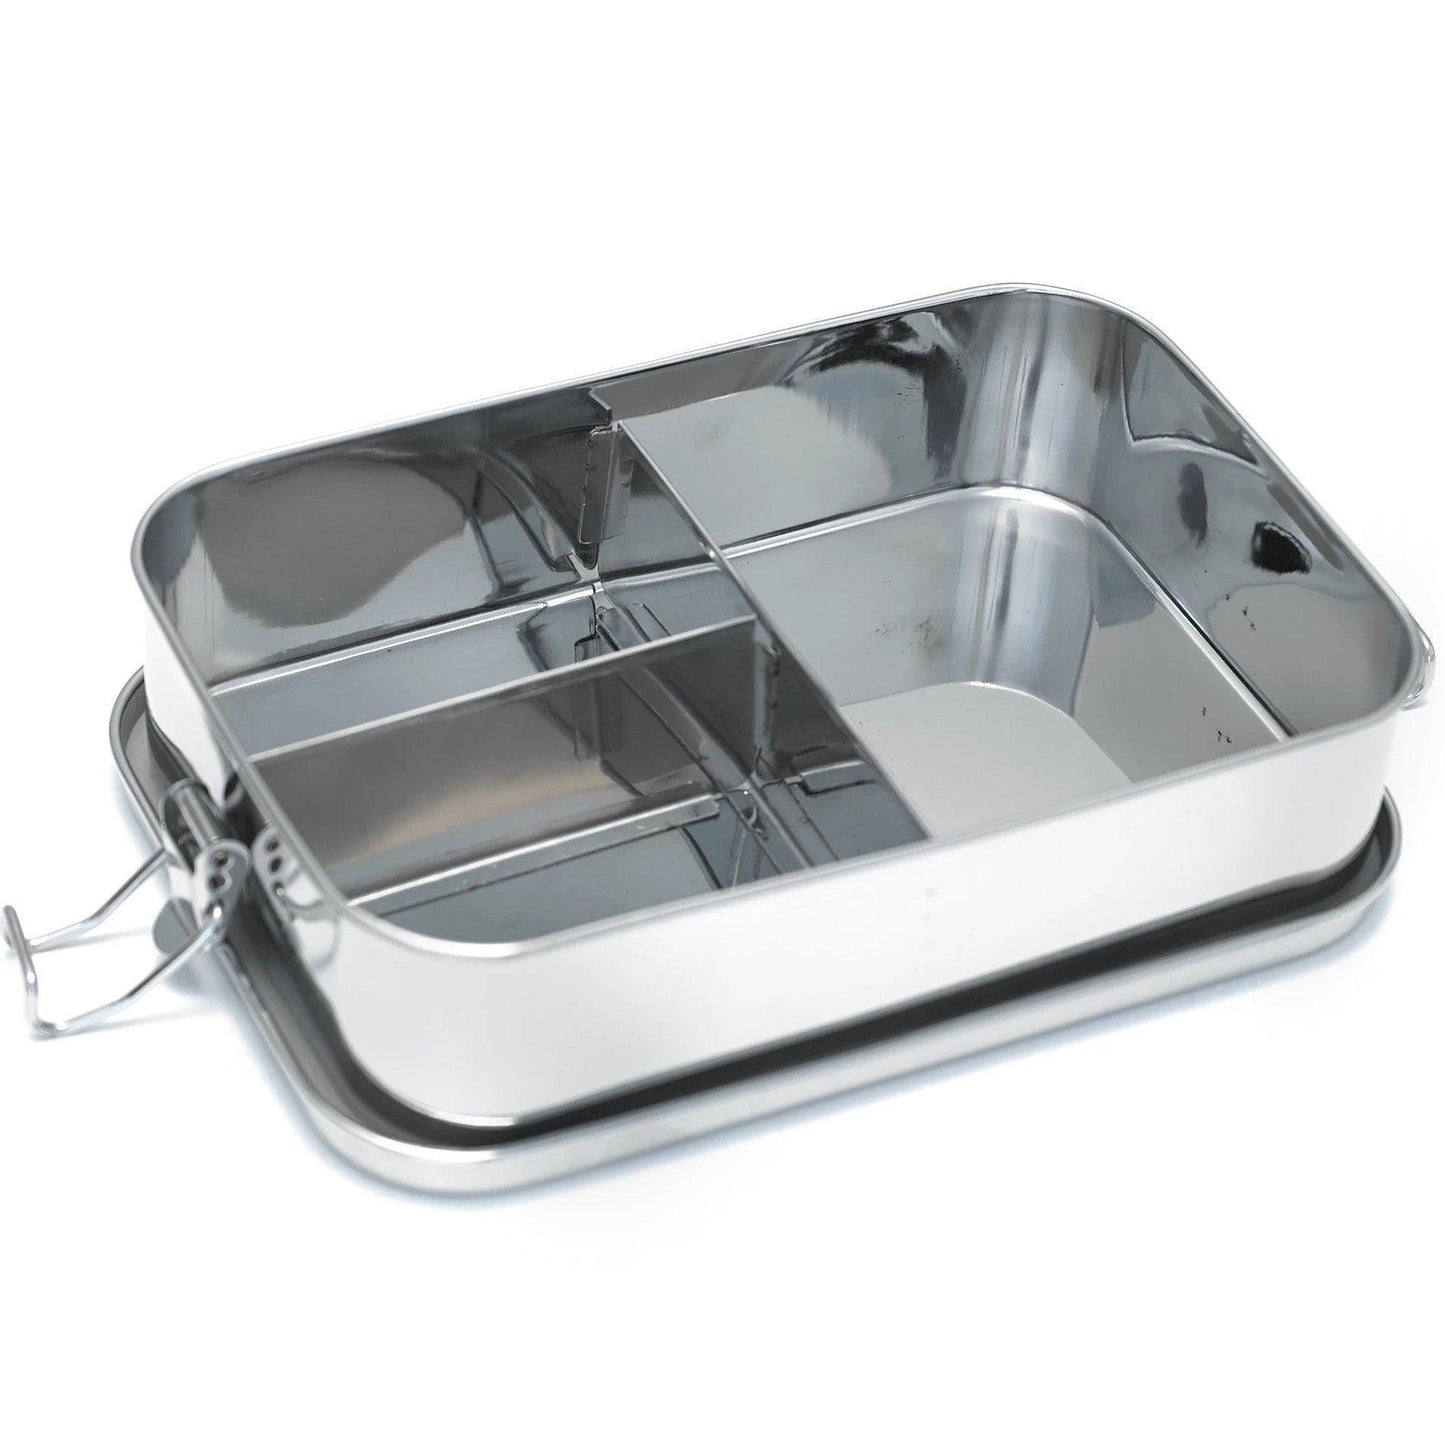 Leakproof Bento Box | Fixed Partitions | Stainless Steel - Meals In Steel 